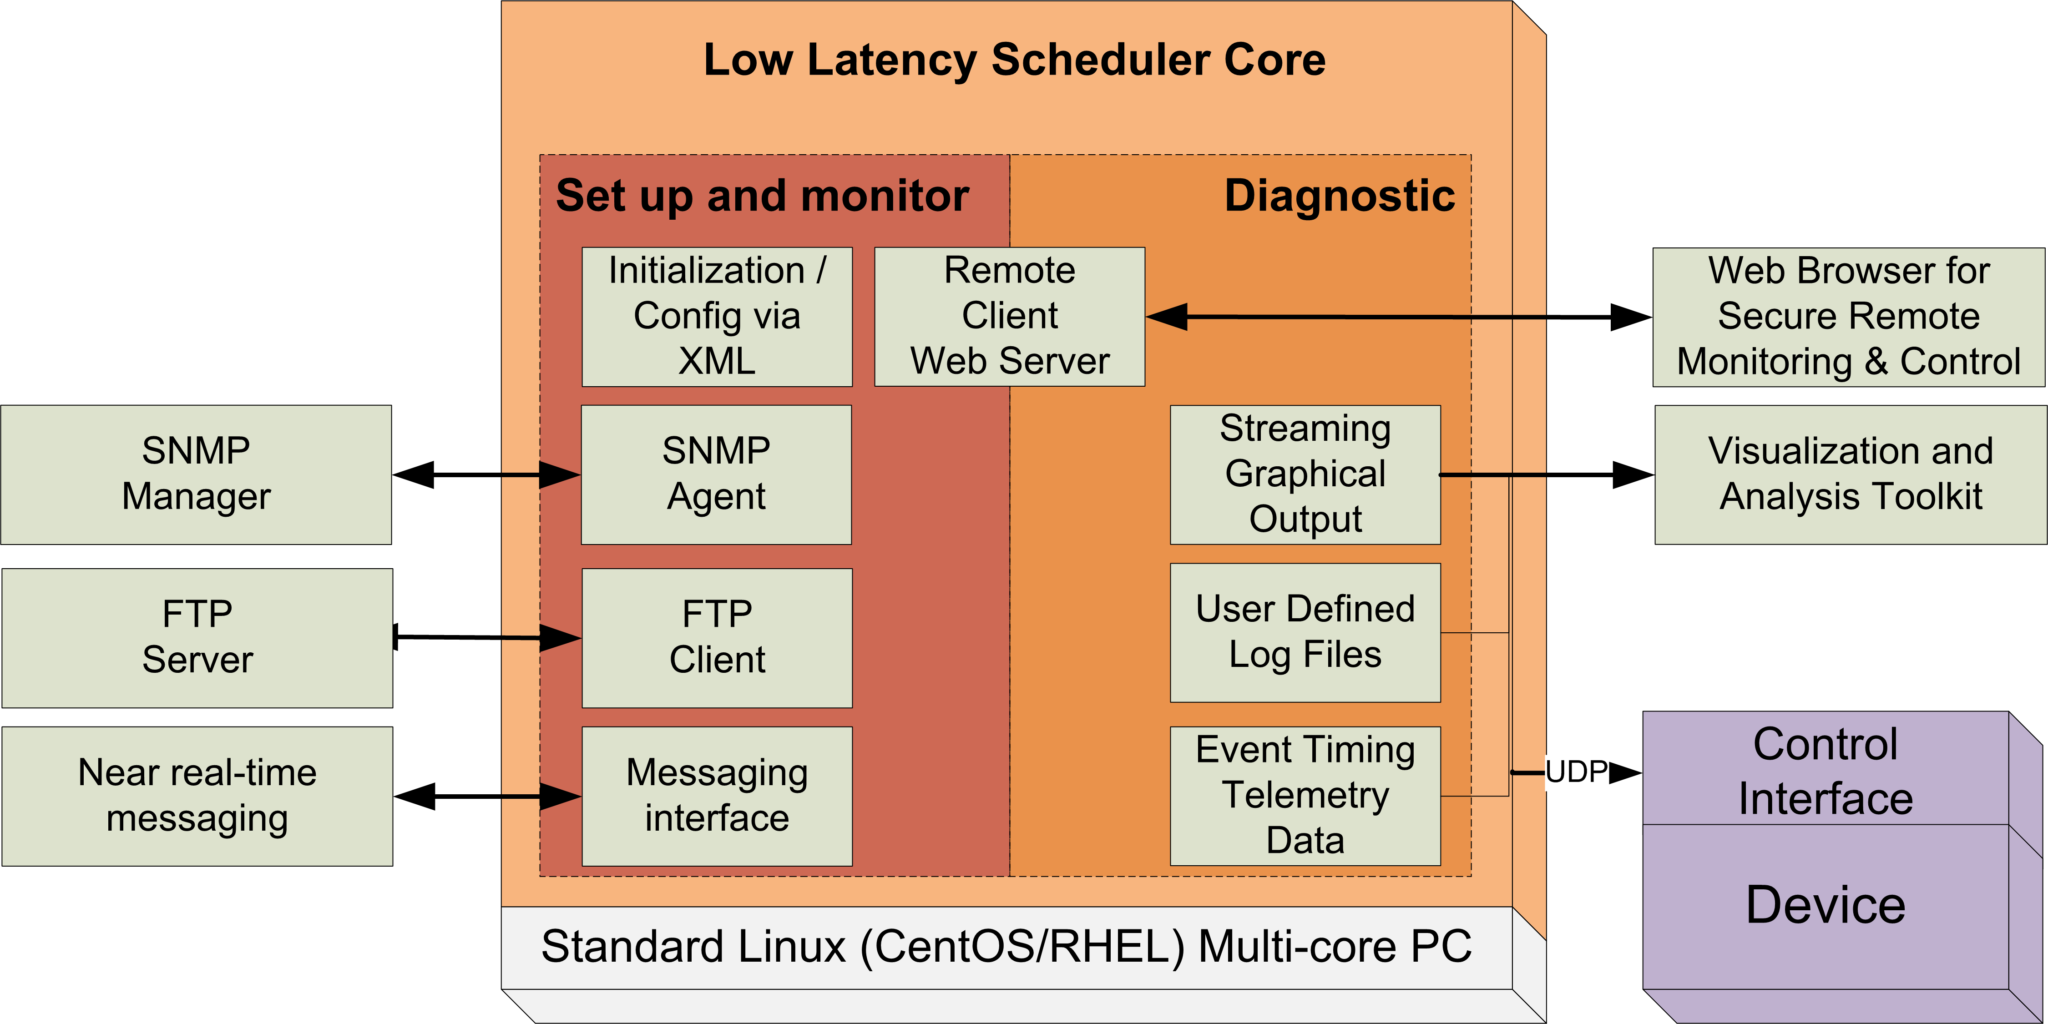 low latency scheduler